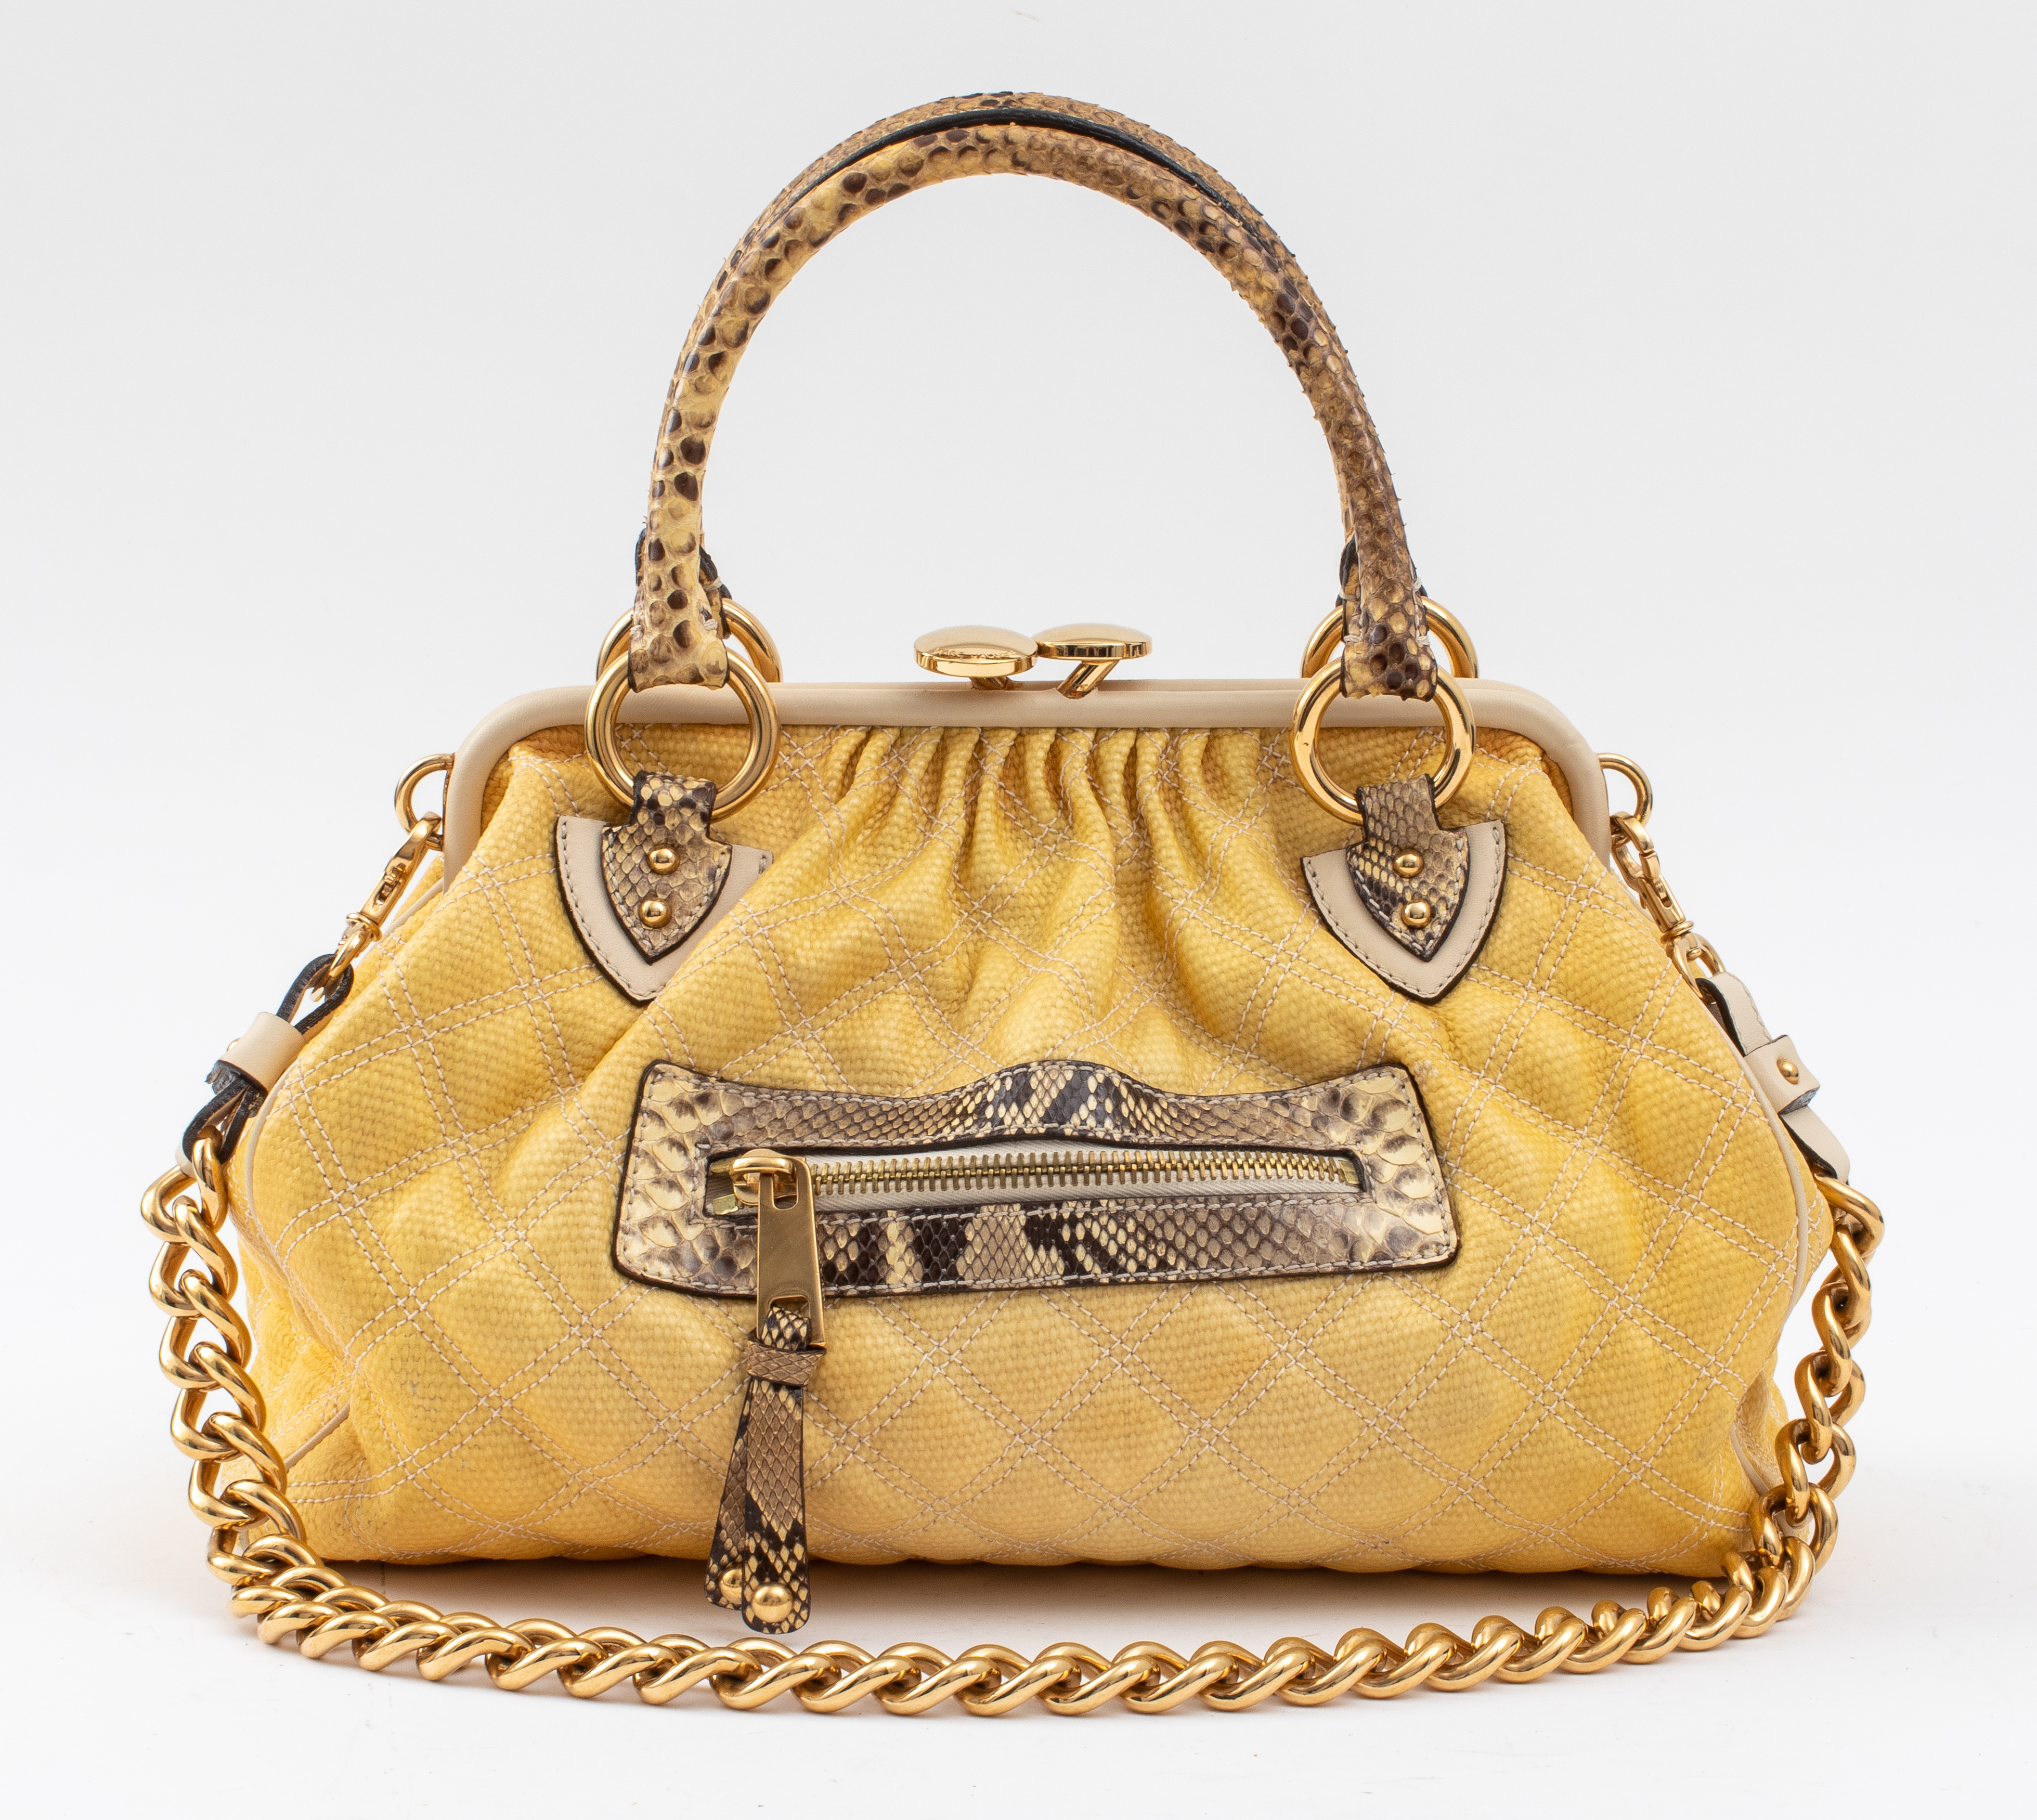 MARC JACOBS QUILTED STAM BAG WITH